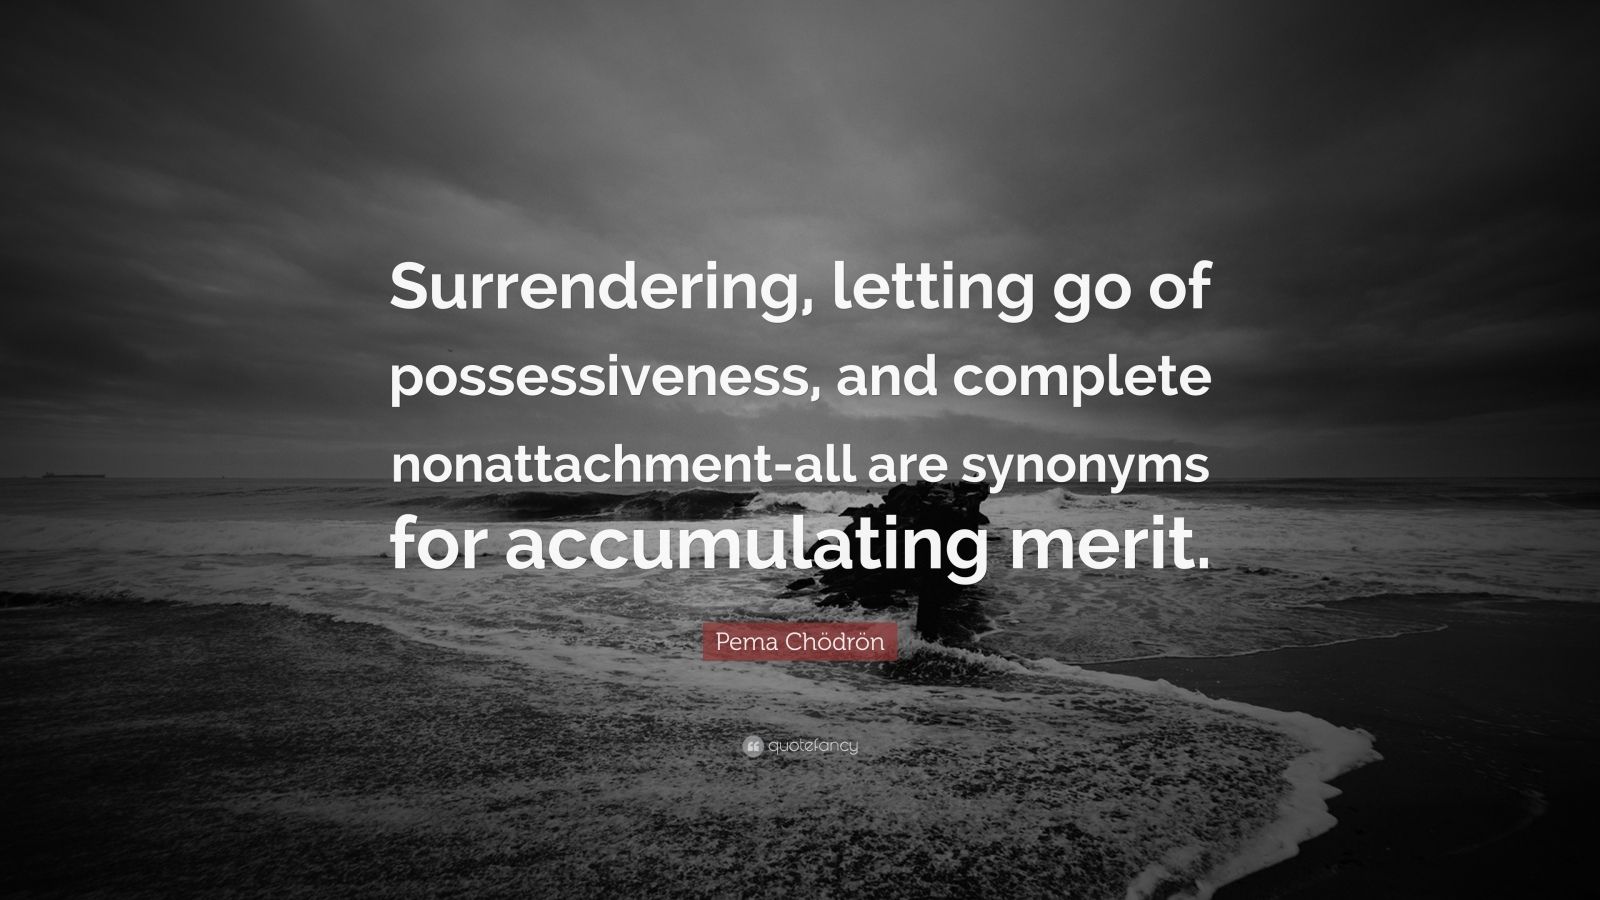 Pema Chödrön Quote: “Surrendering, letting go of possessiveness, and complete nonattachment-all are synonyms for accumulating merit.”